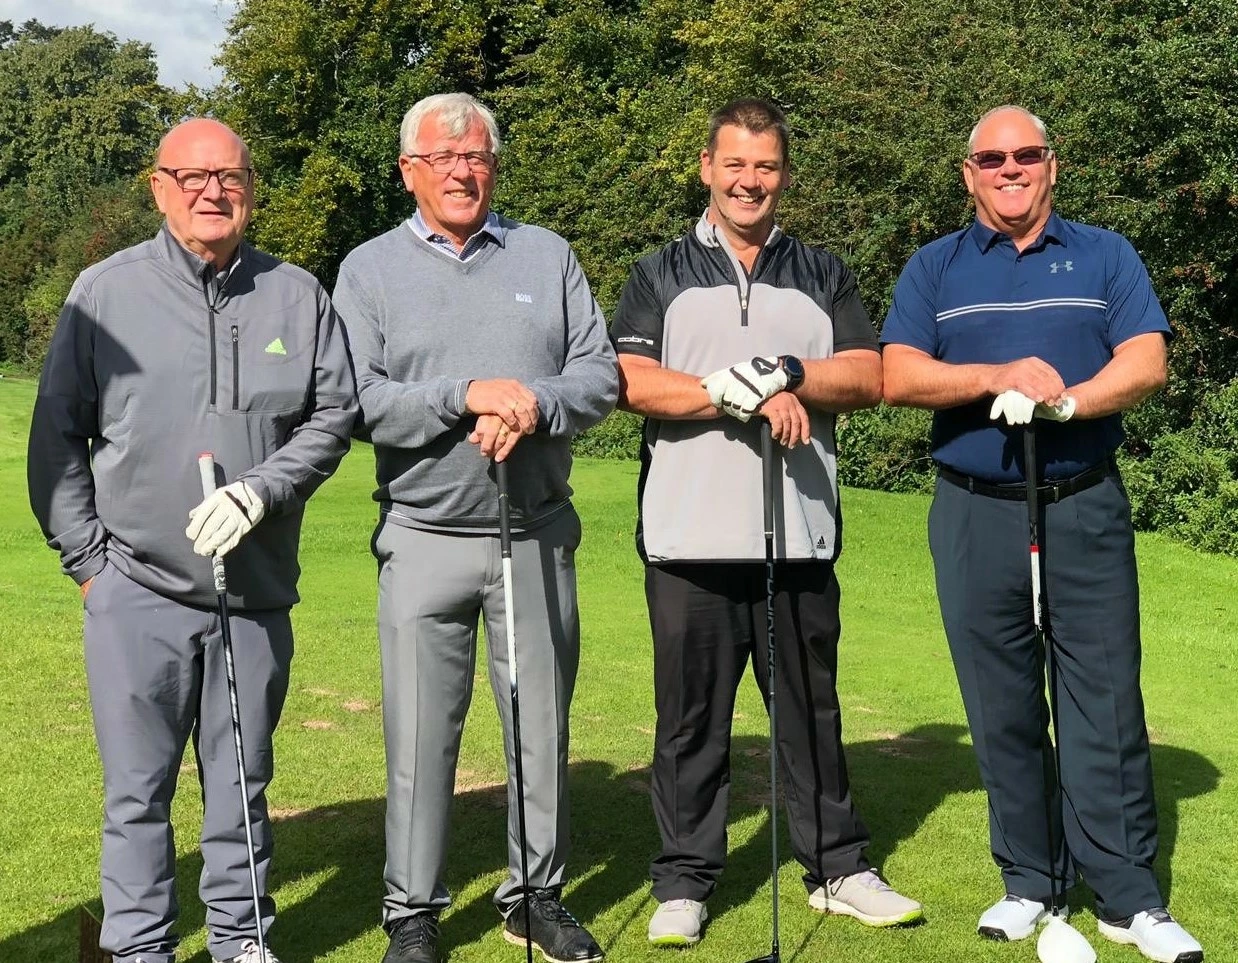 The Advantage charity golf day